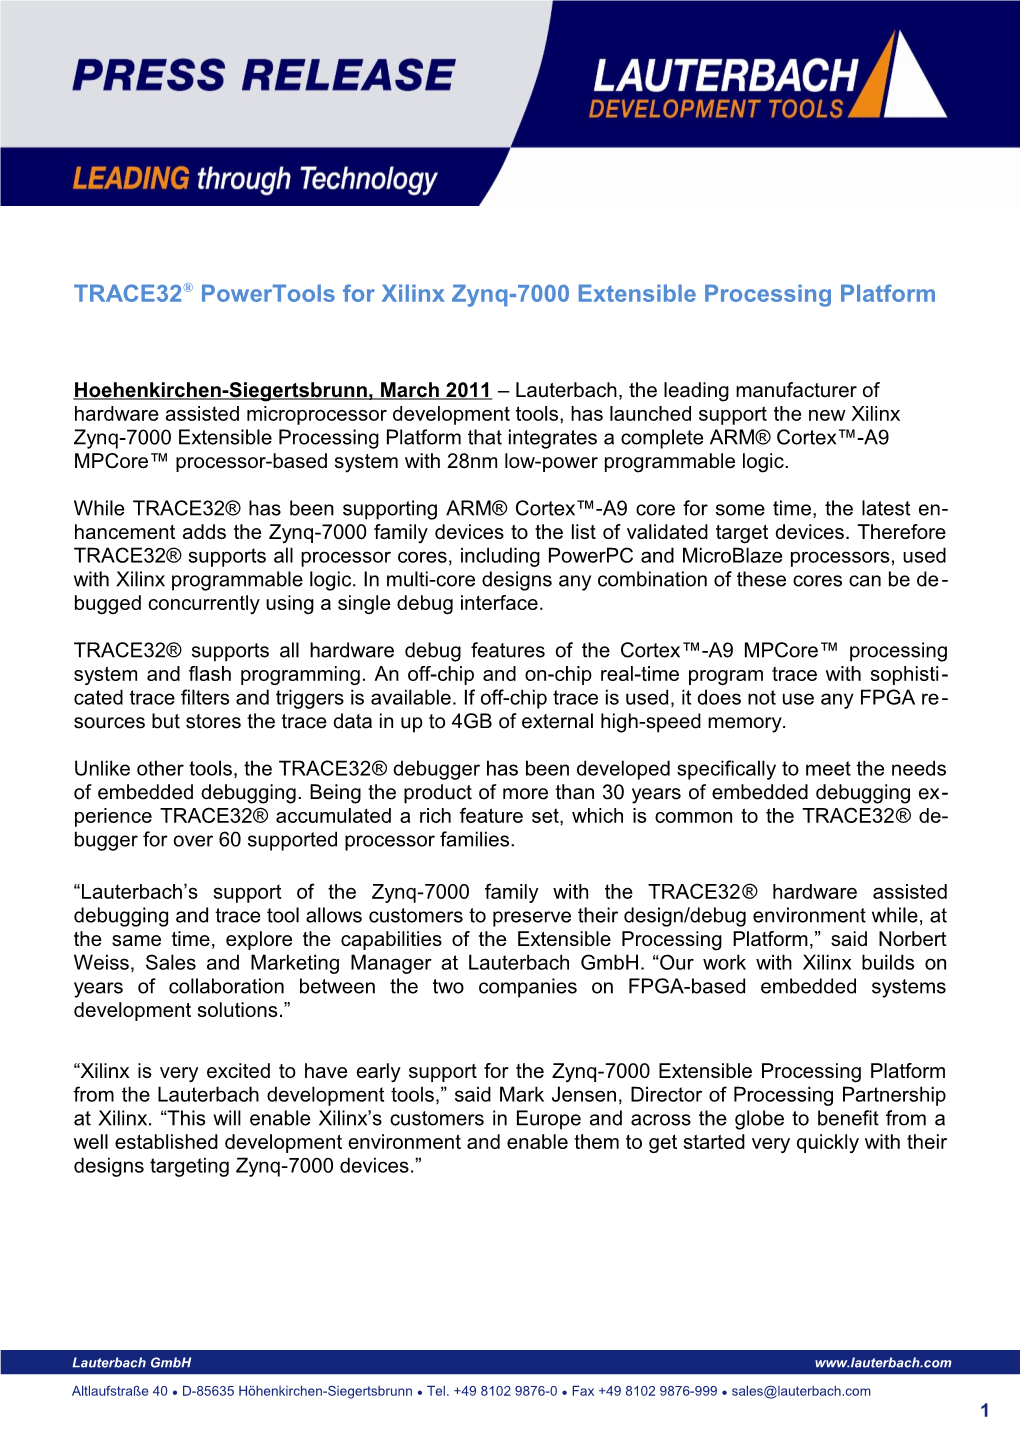 TRACE32 Powertools for Xilinx Zynq-7000 Extensible Processing Platform